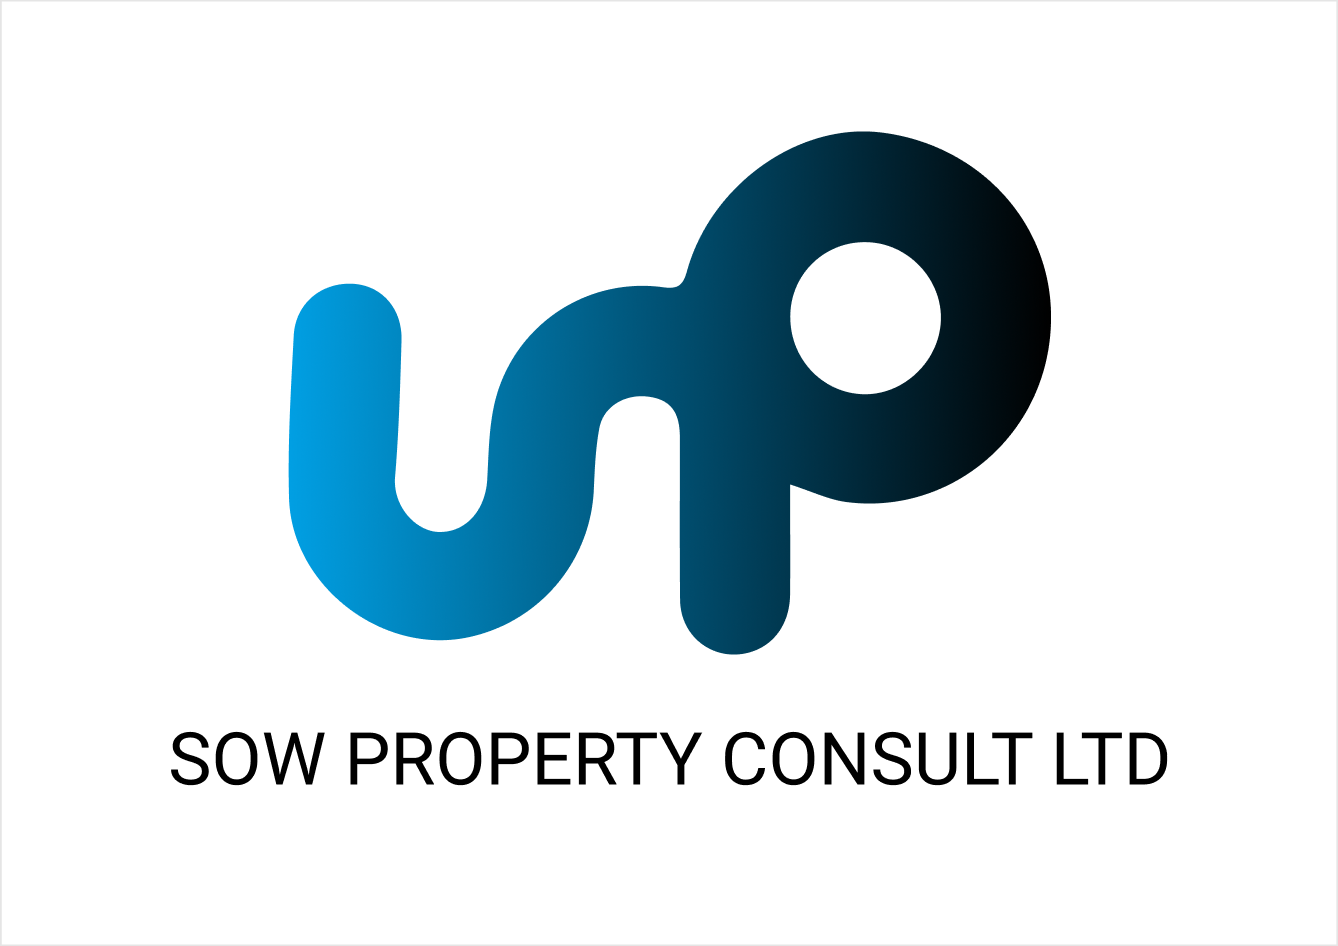 Sow Property Consult